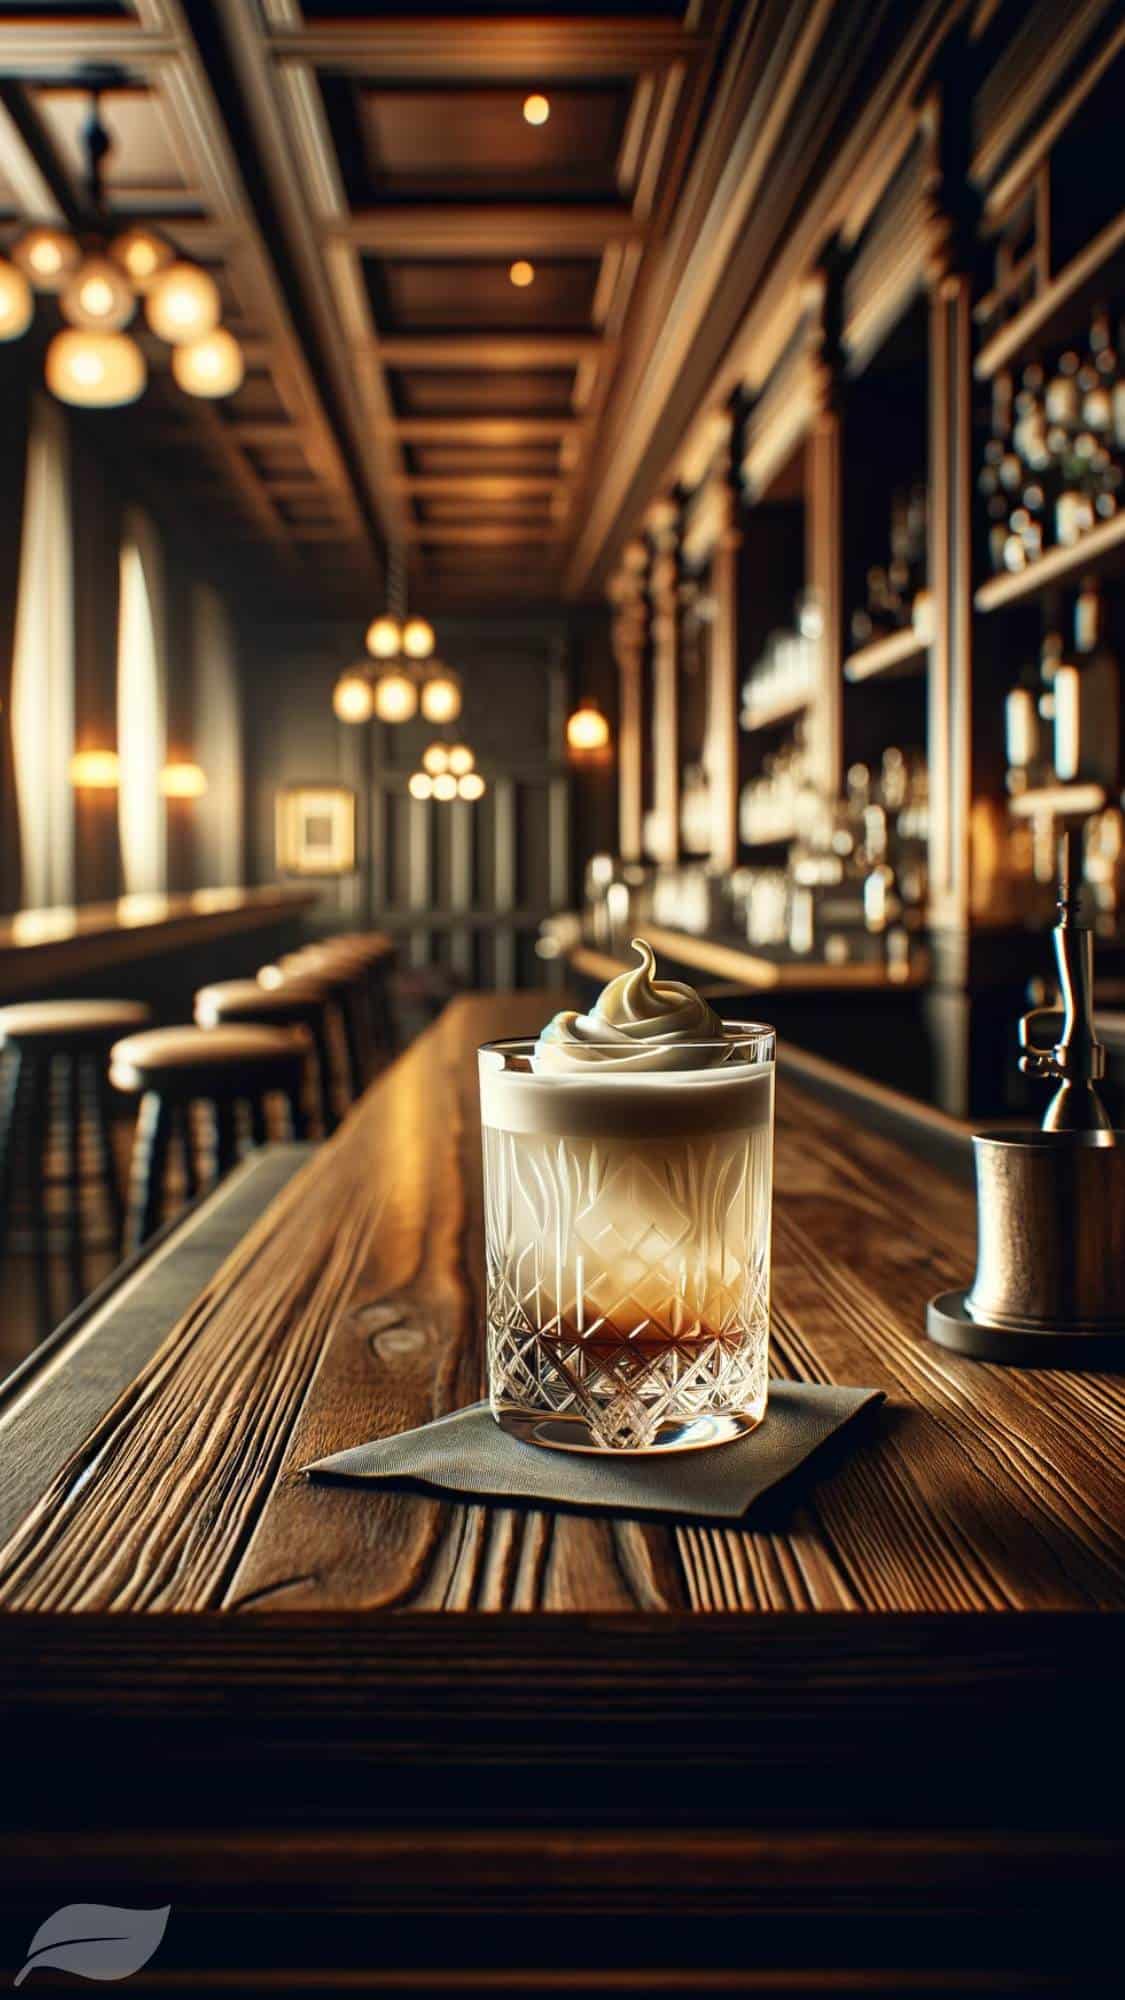 A stylish and inviting vertical image of a White Russian cocktail. The cocktail is presented in an old-fashioned glass, filled with ice and topped with heavy cream